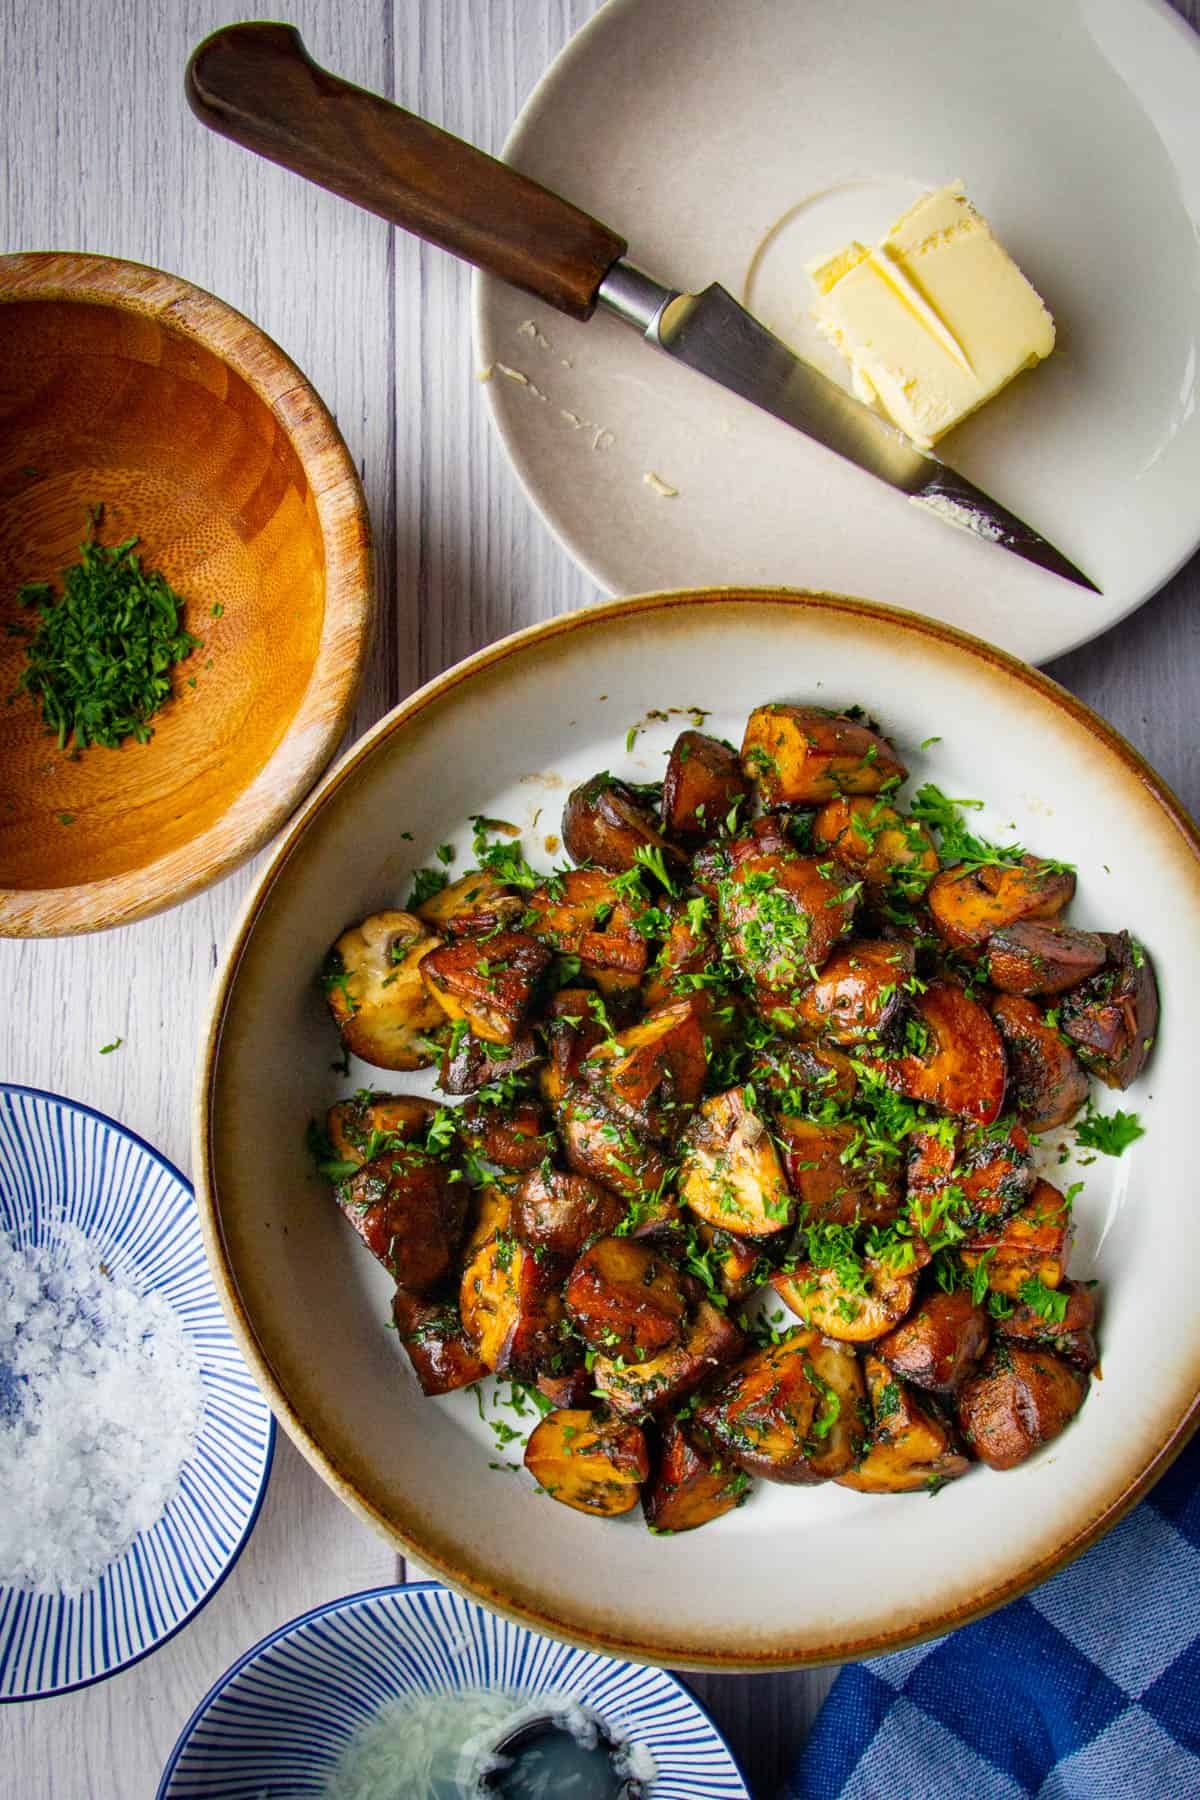 How to Cook Chestnut Mushrooms (Agaricus bisporus) with Butter, Garlic, Parsley and Lemon